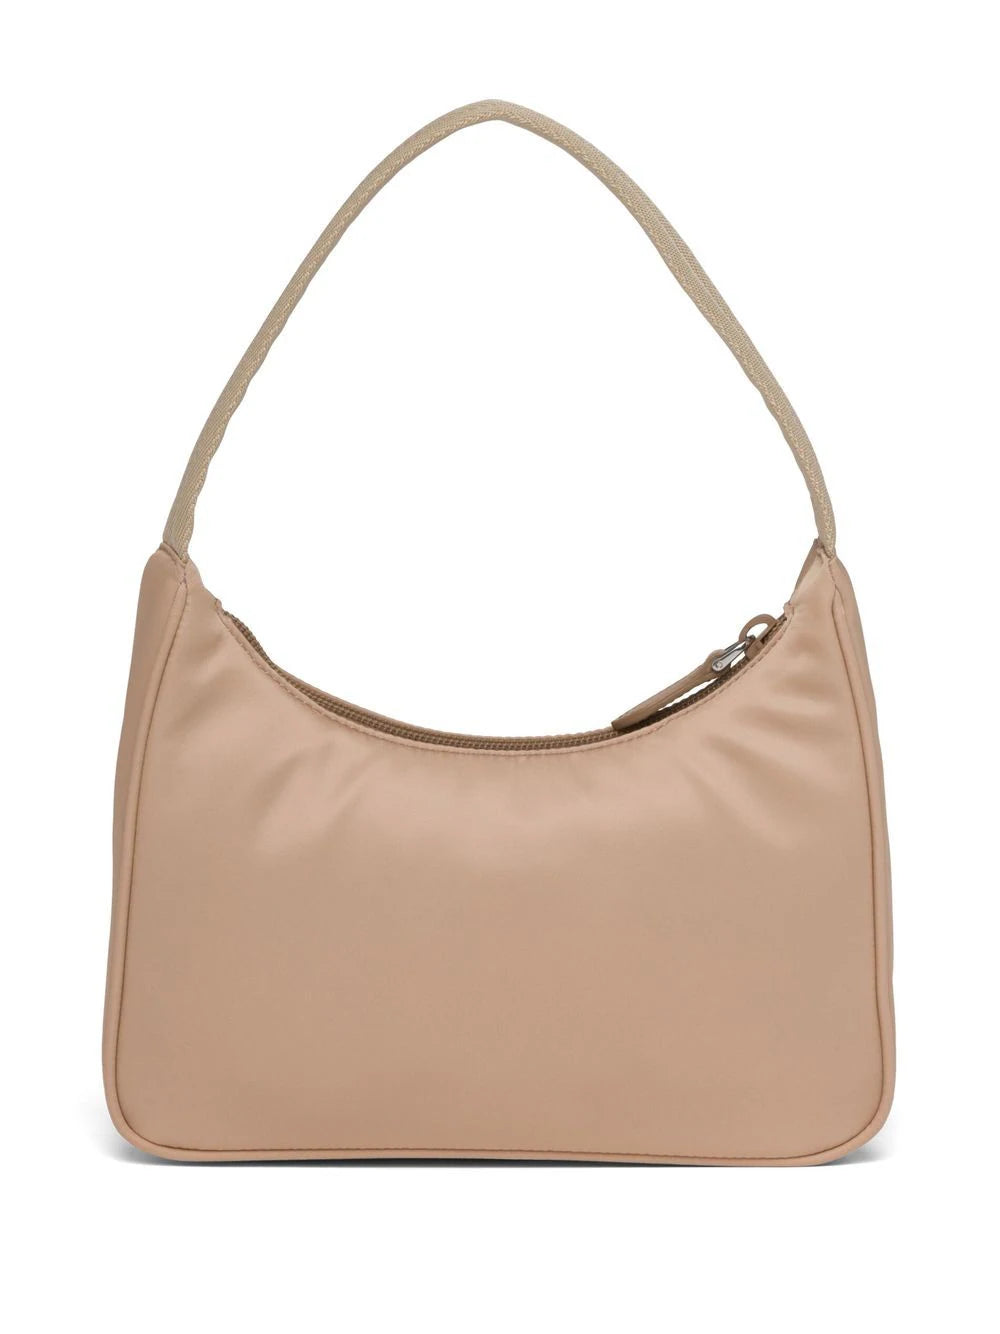 A stylish beige Prada Re-Edition Bag 2000 featuring the iconic triangular logo plaque, perfect for adding a touch of modern sophistication to any ensemble.